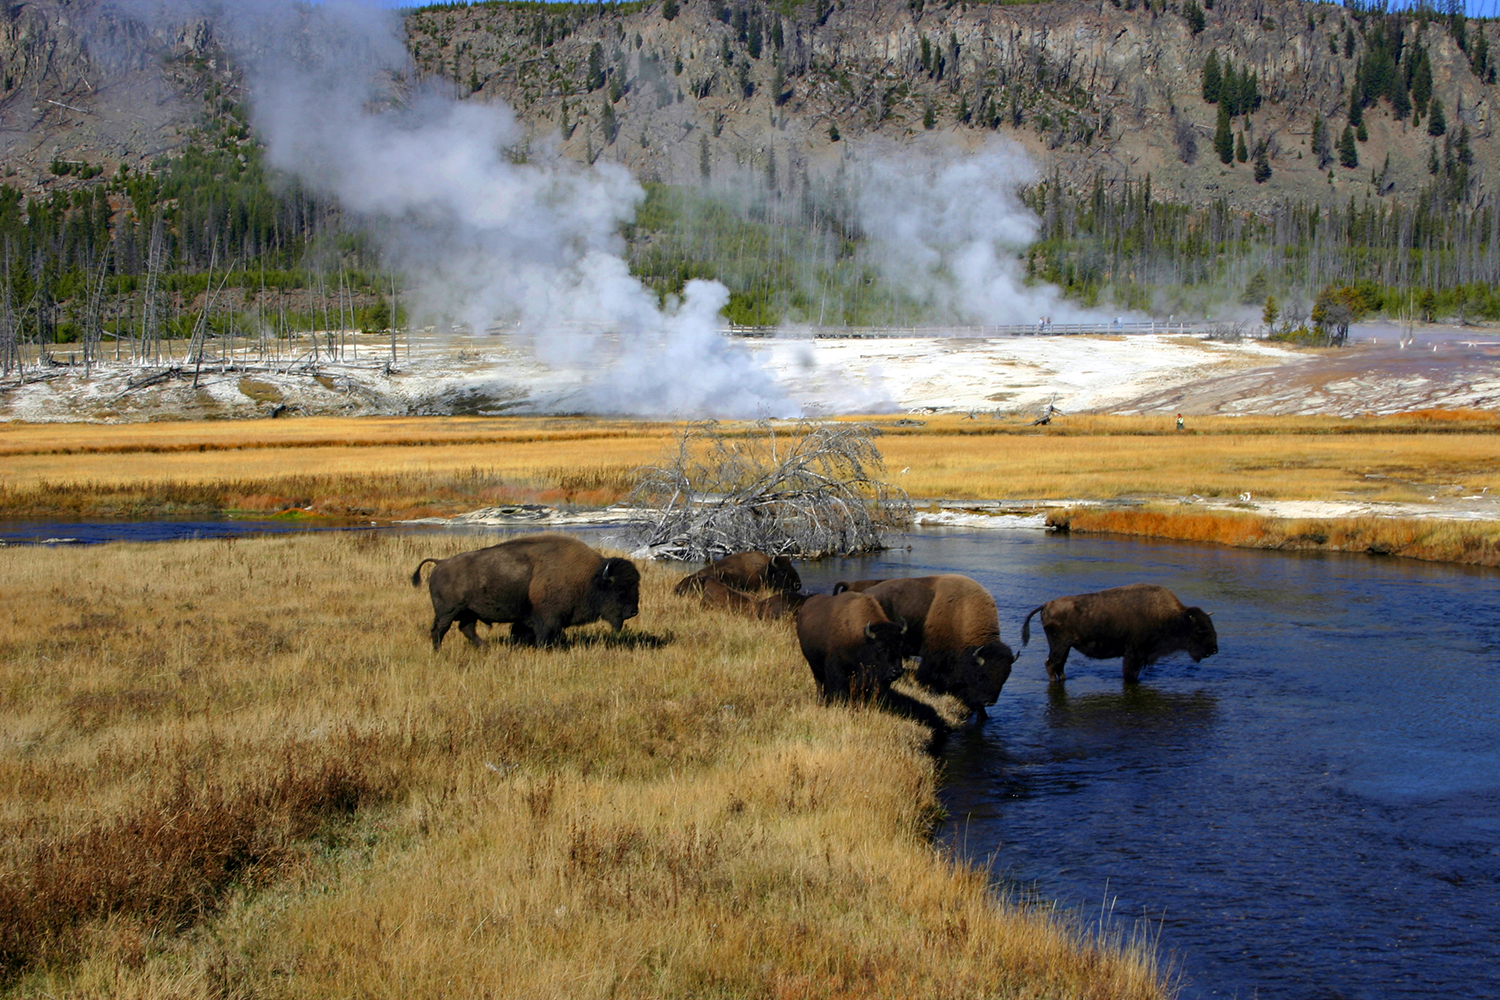 Where the wild things are: bison crossing a river in Yellowstone National Park. Image courtesy of Wyoming Office of Tourism